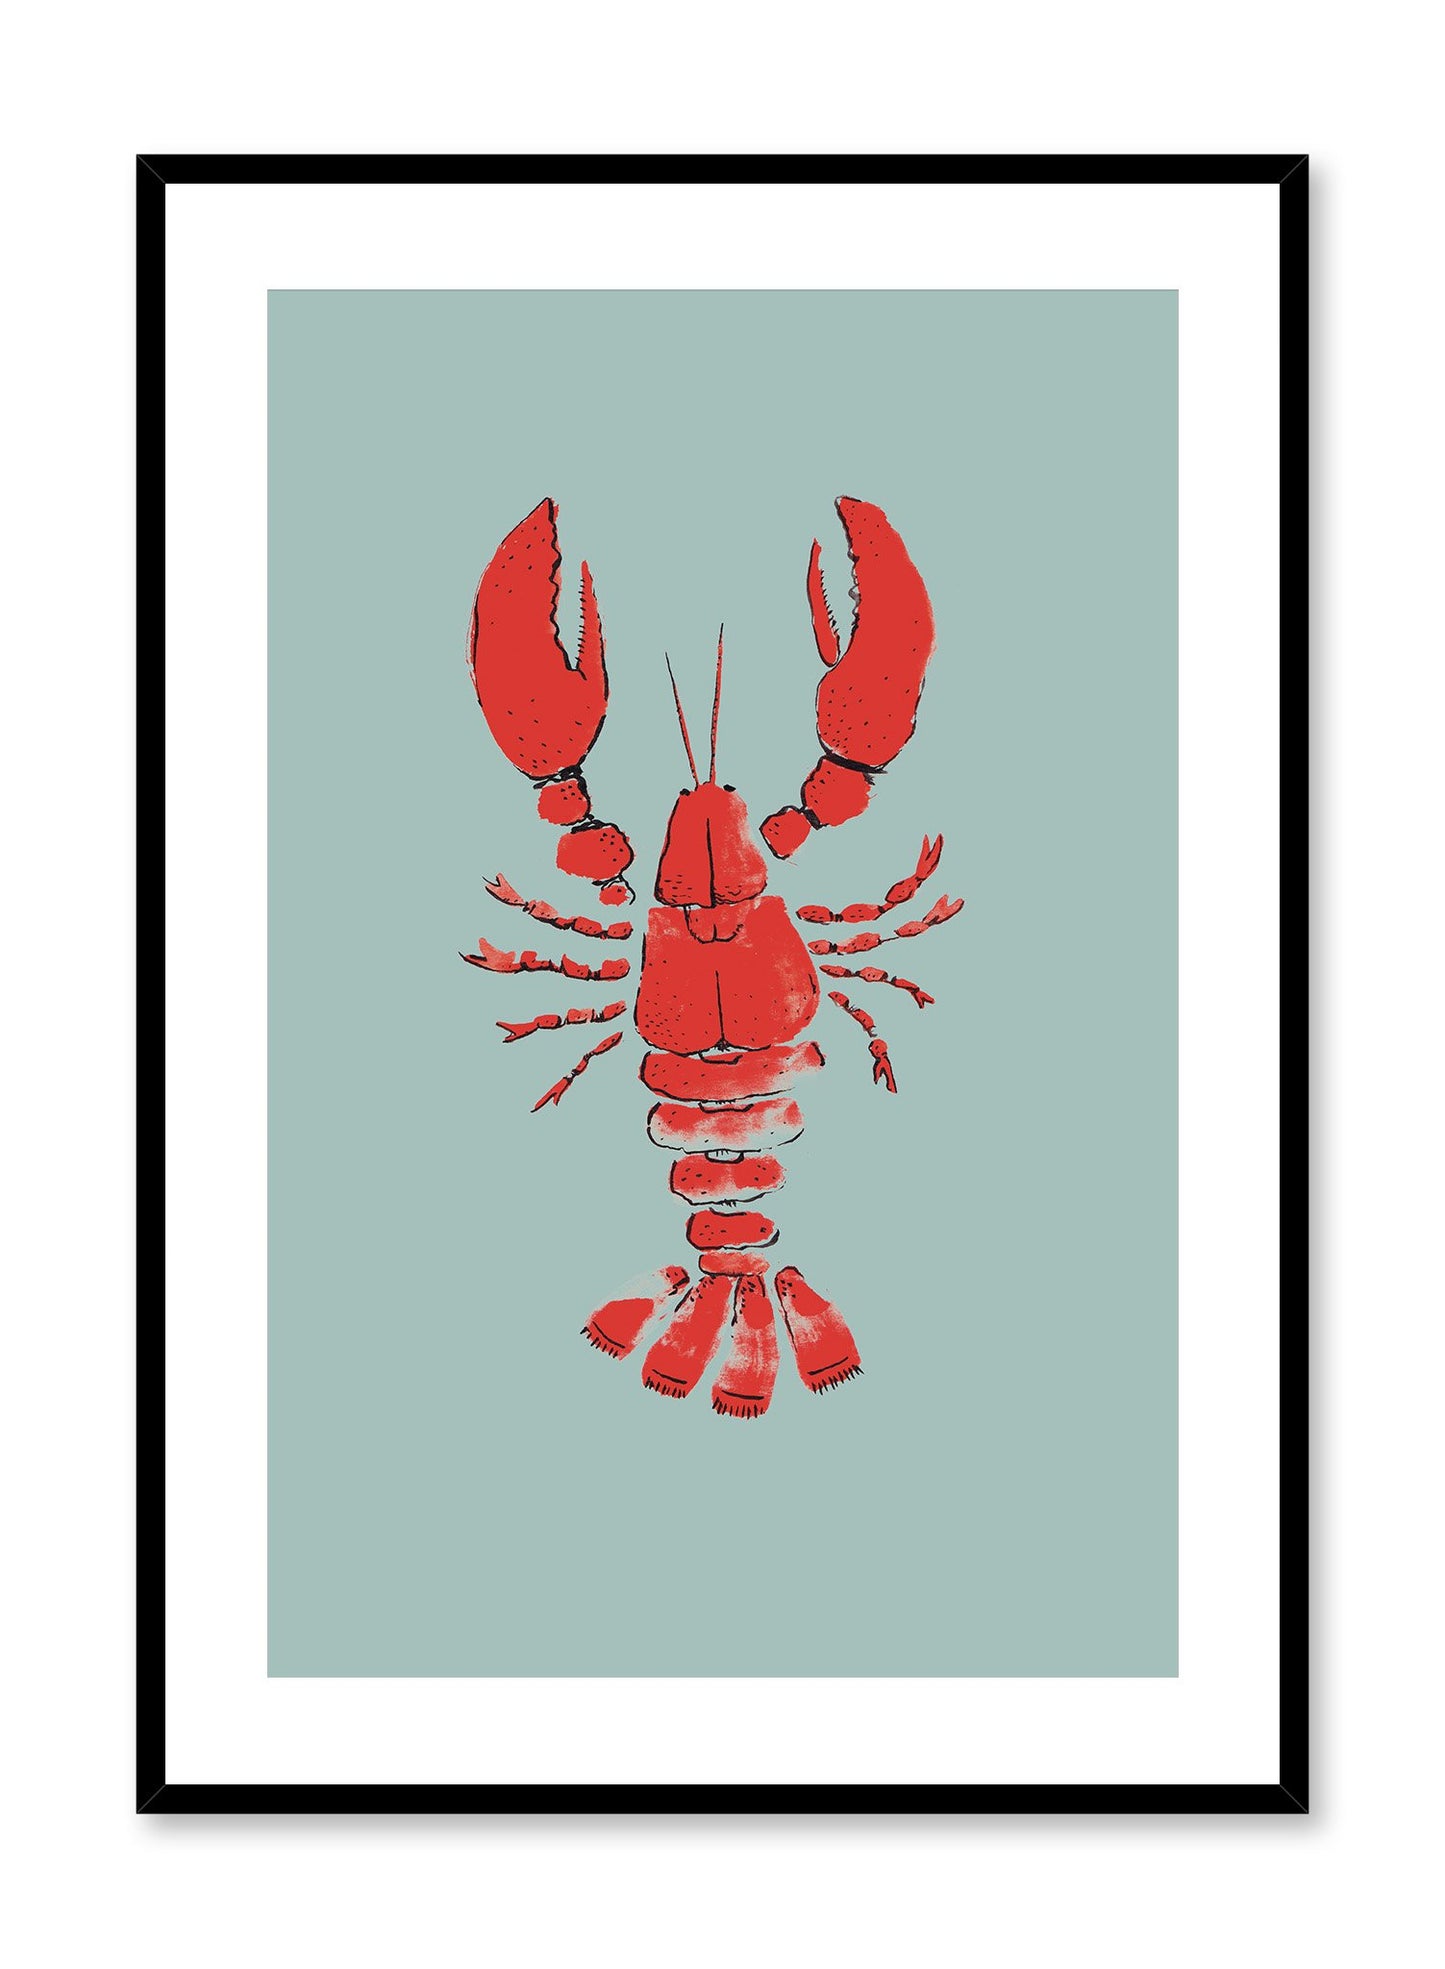 Hello Lobster is a minimalist illustration of a red lobster laid down to show all its creases by Opposite Wall.